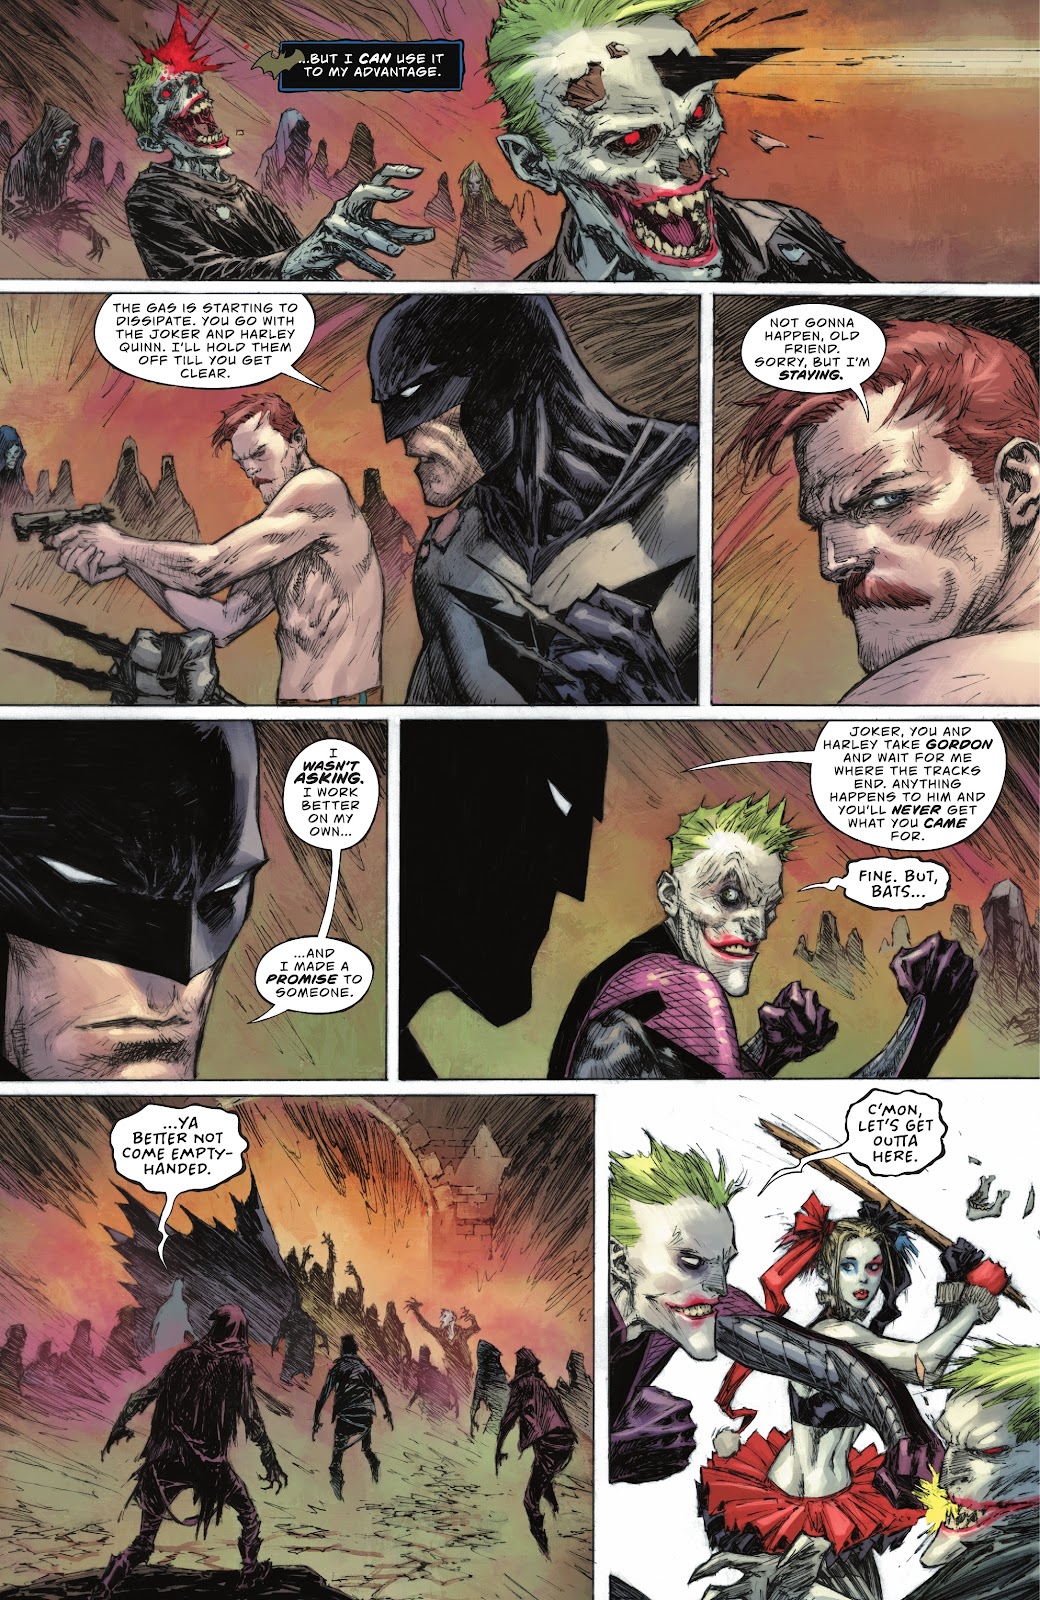 Batman & The Joker: The Deadly Duo issue 6 - Page 19